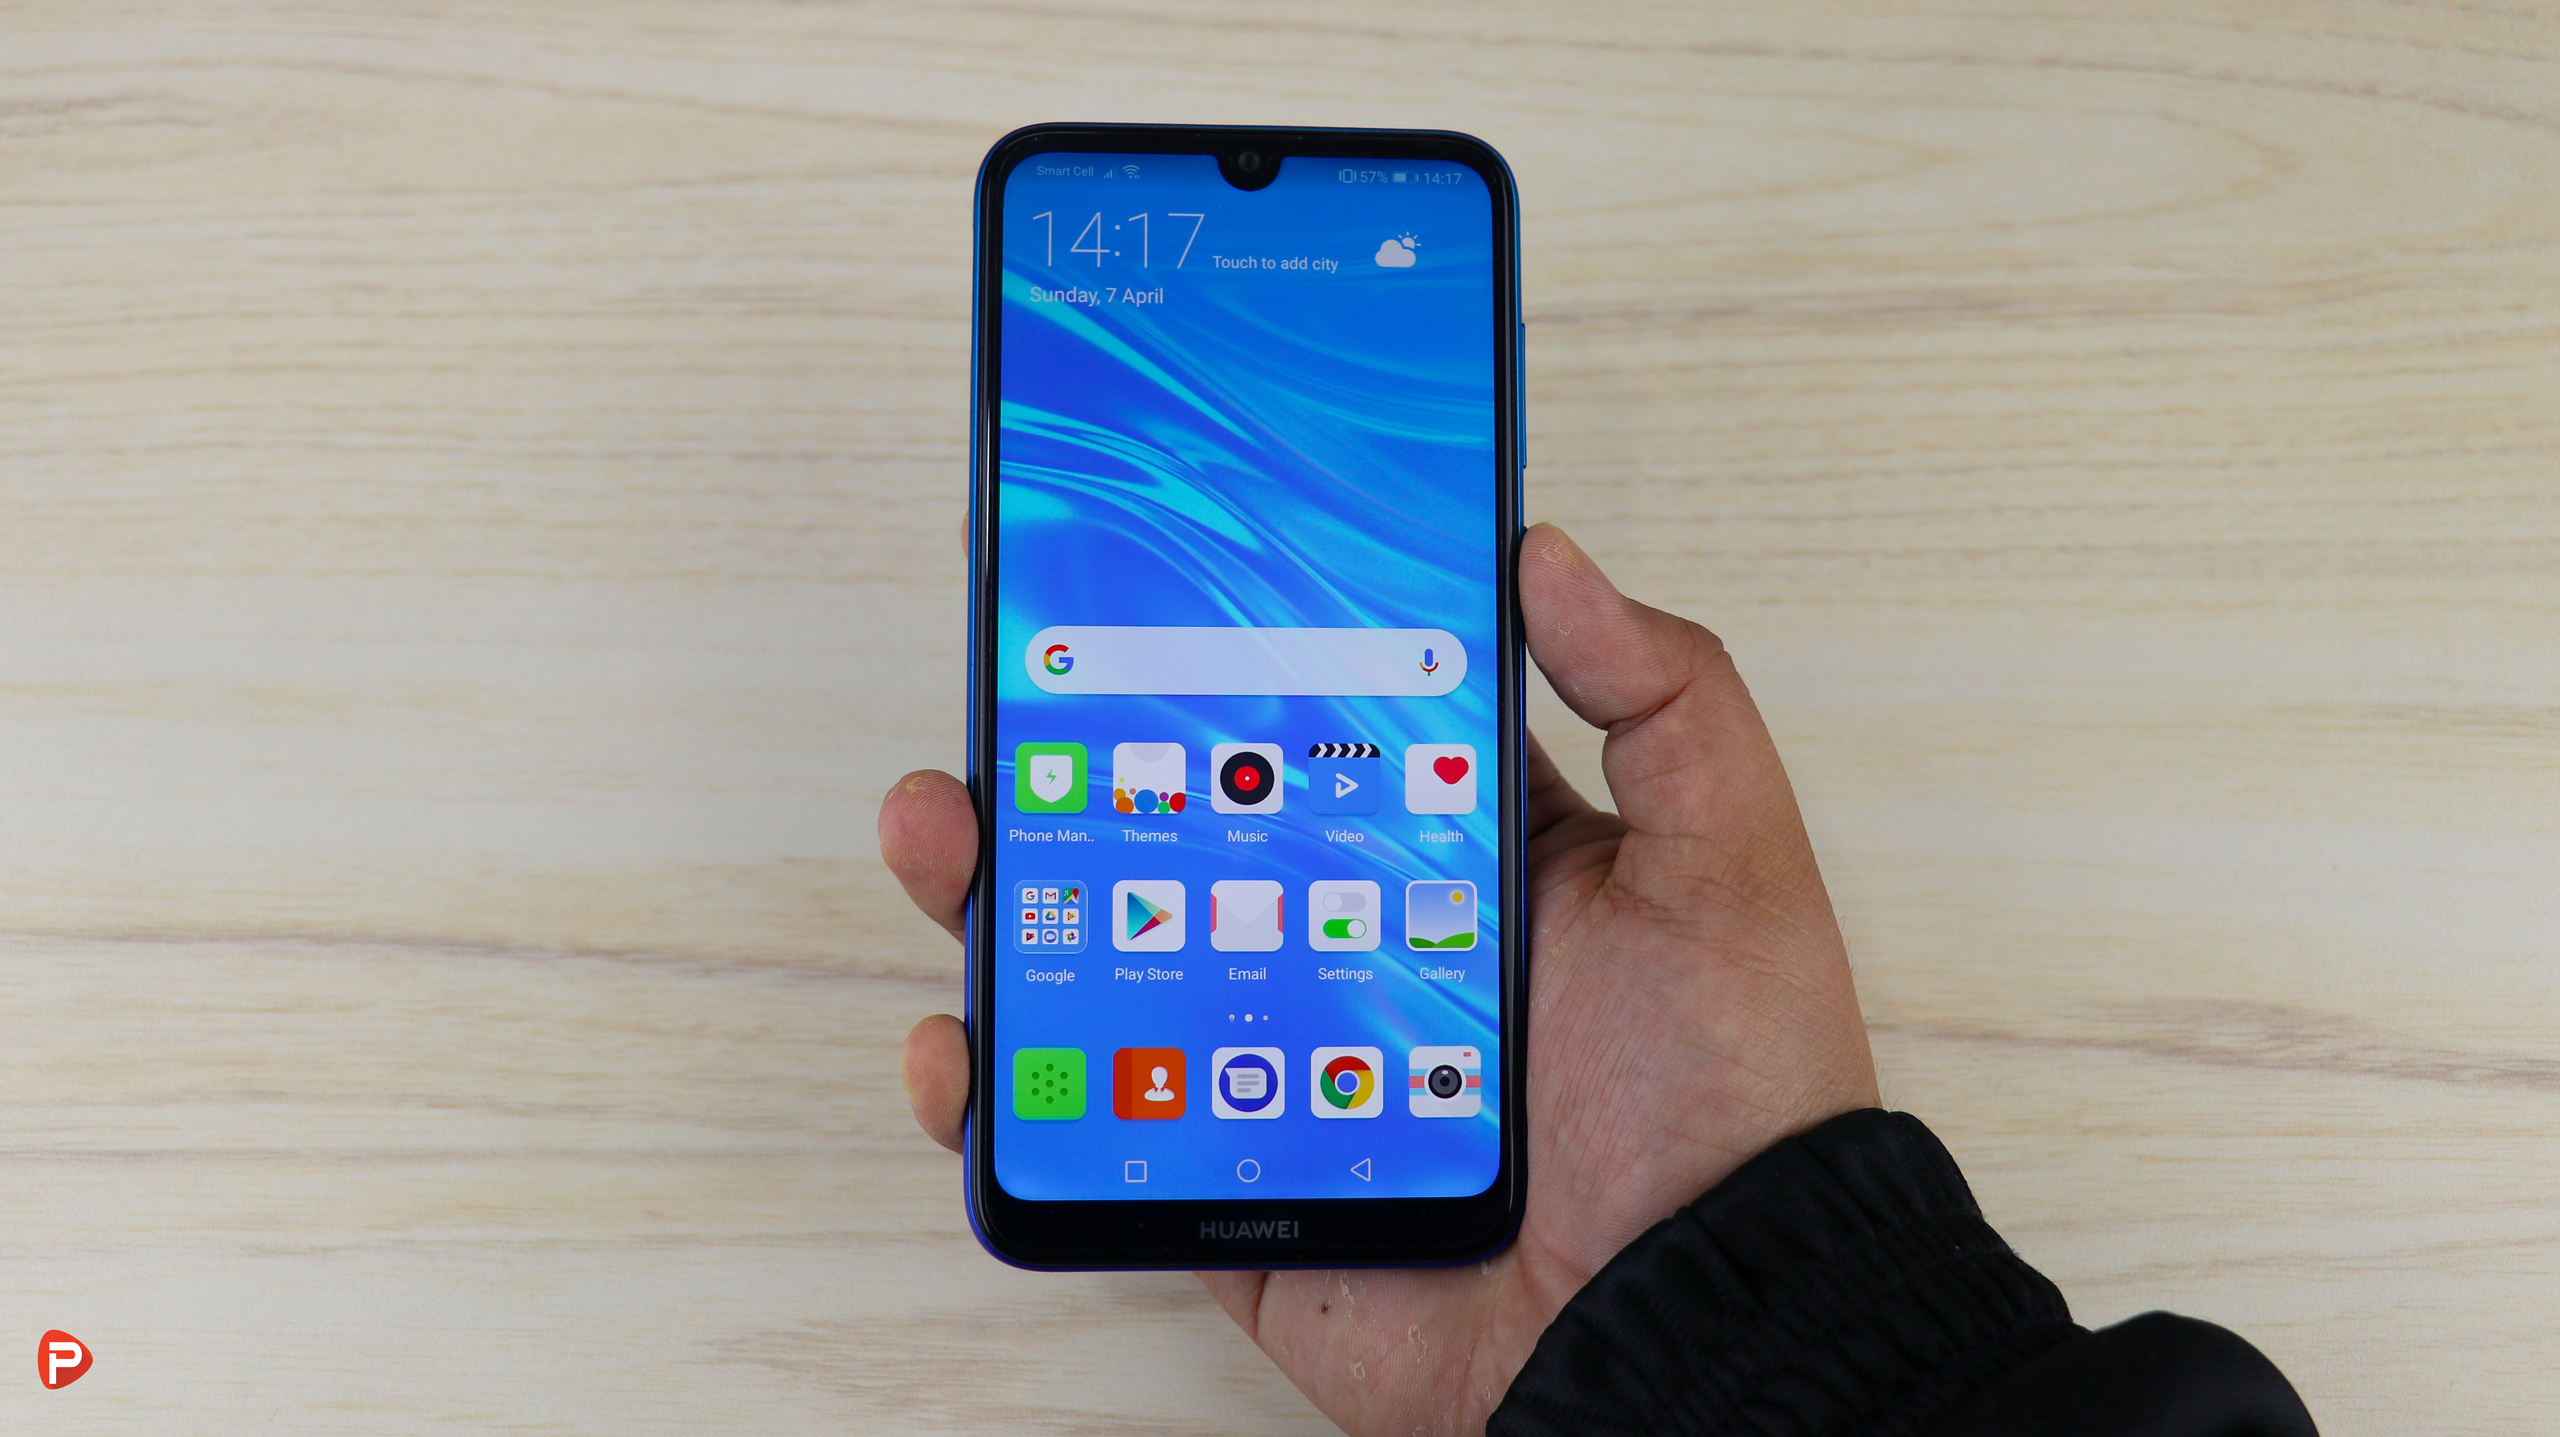 Huawei Y7 Pro 2019 Features